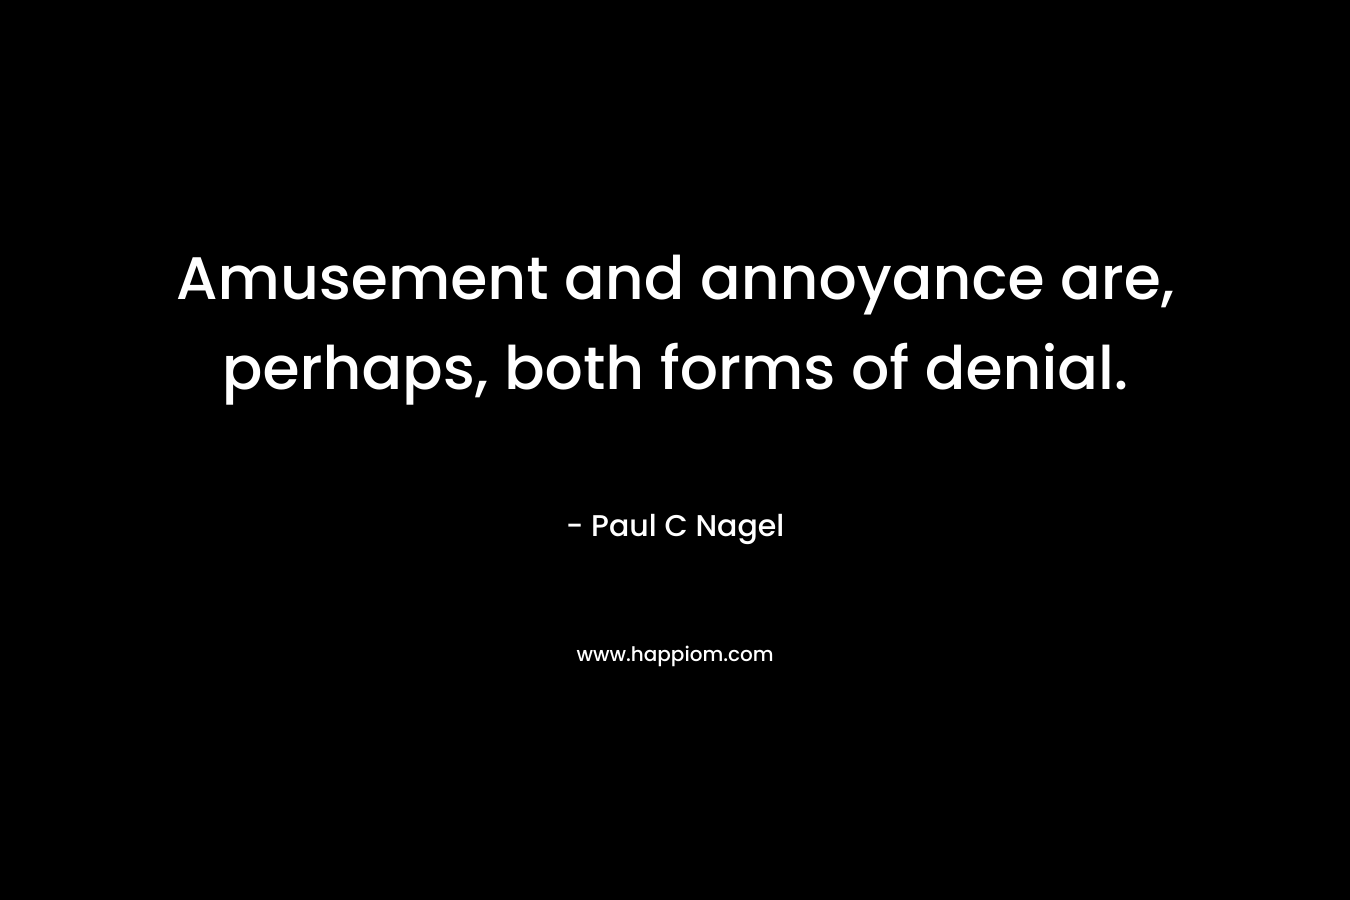 Amusement and annoyance are, perhaps, both forms of denial.